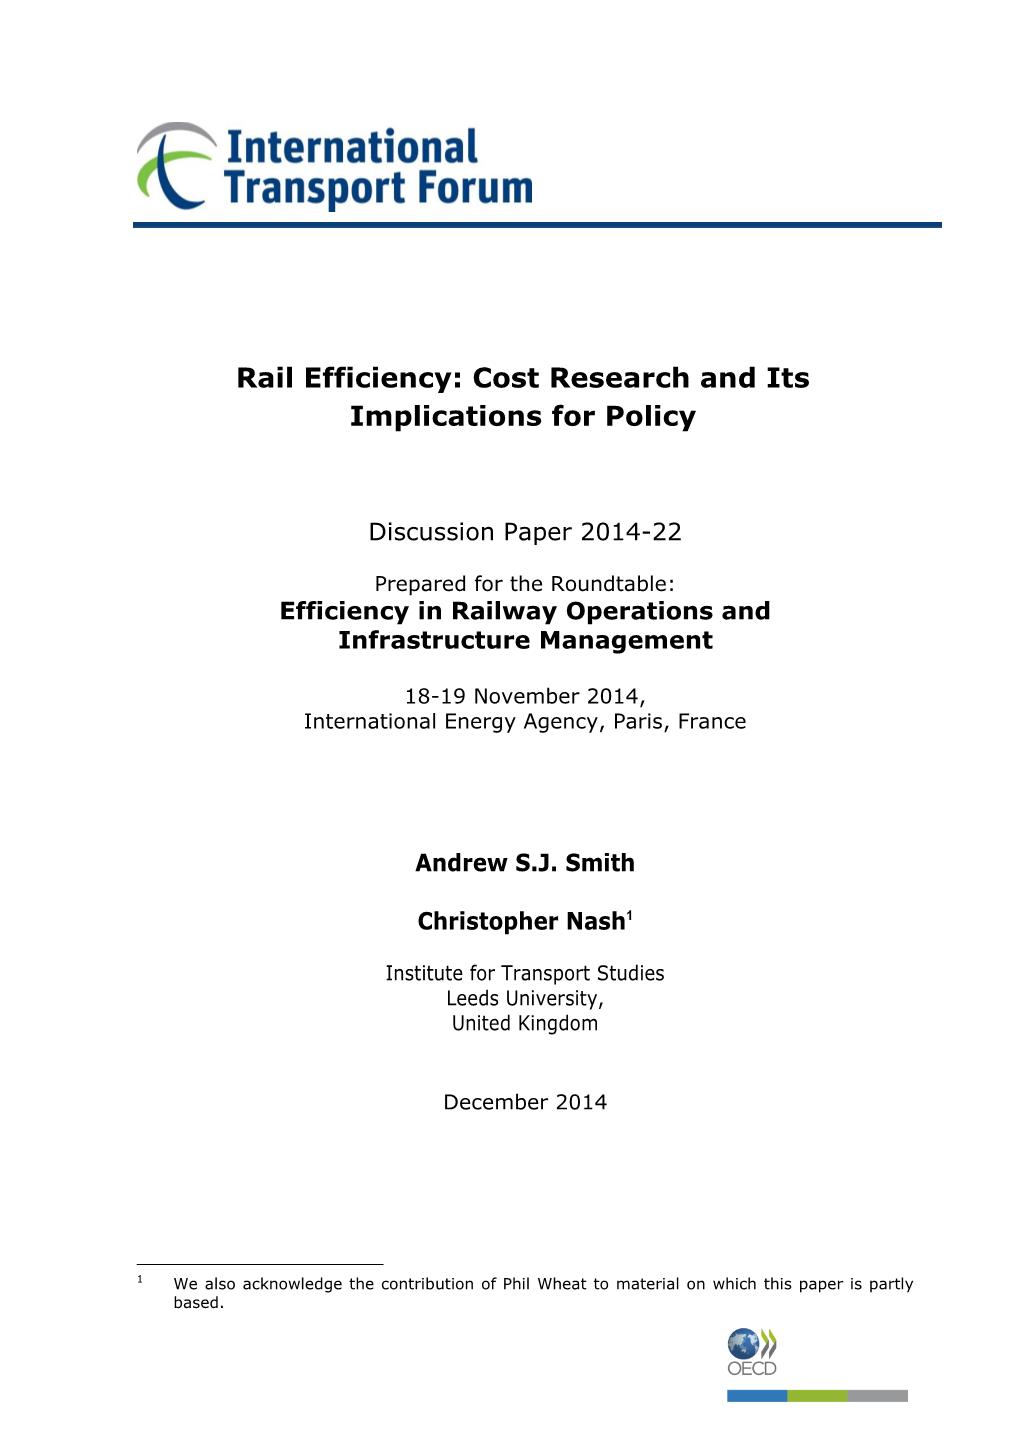 Rail Efficiency: Cost Research and Its Implications for Policy